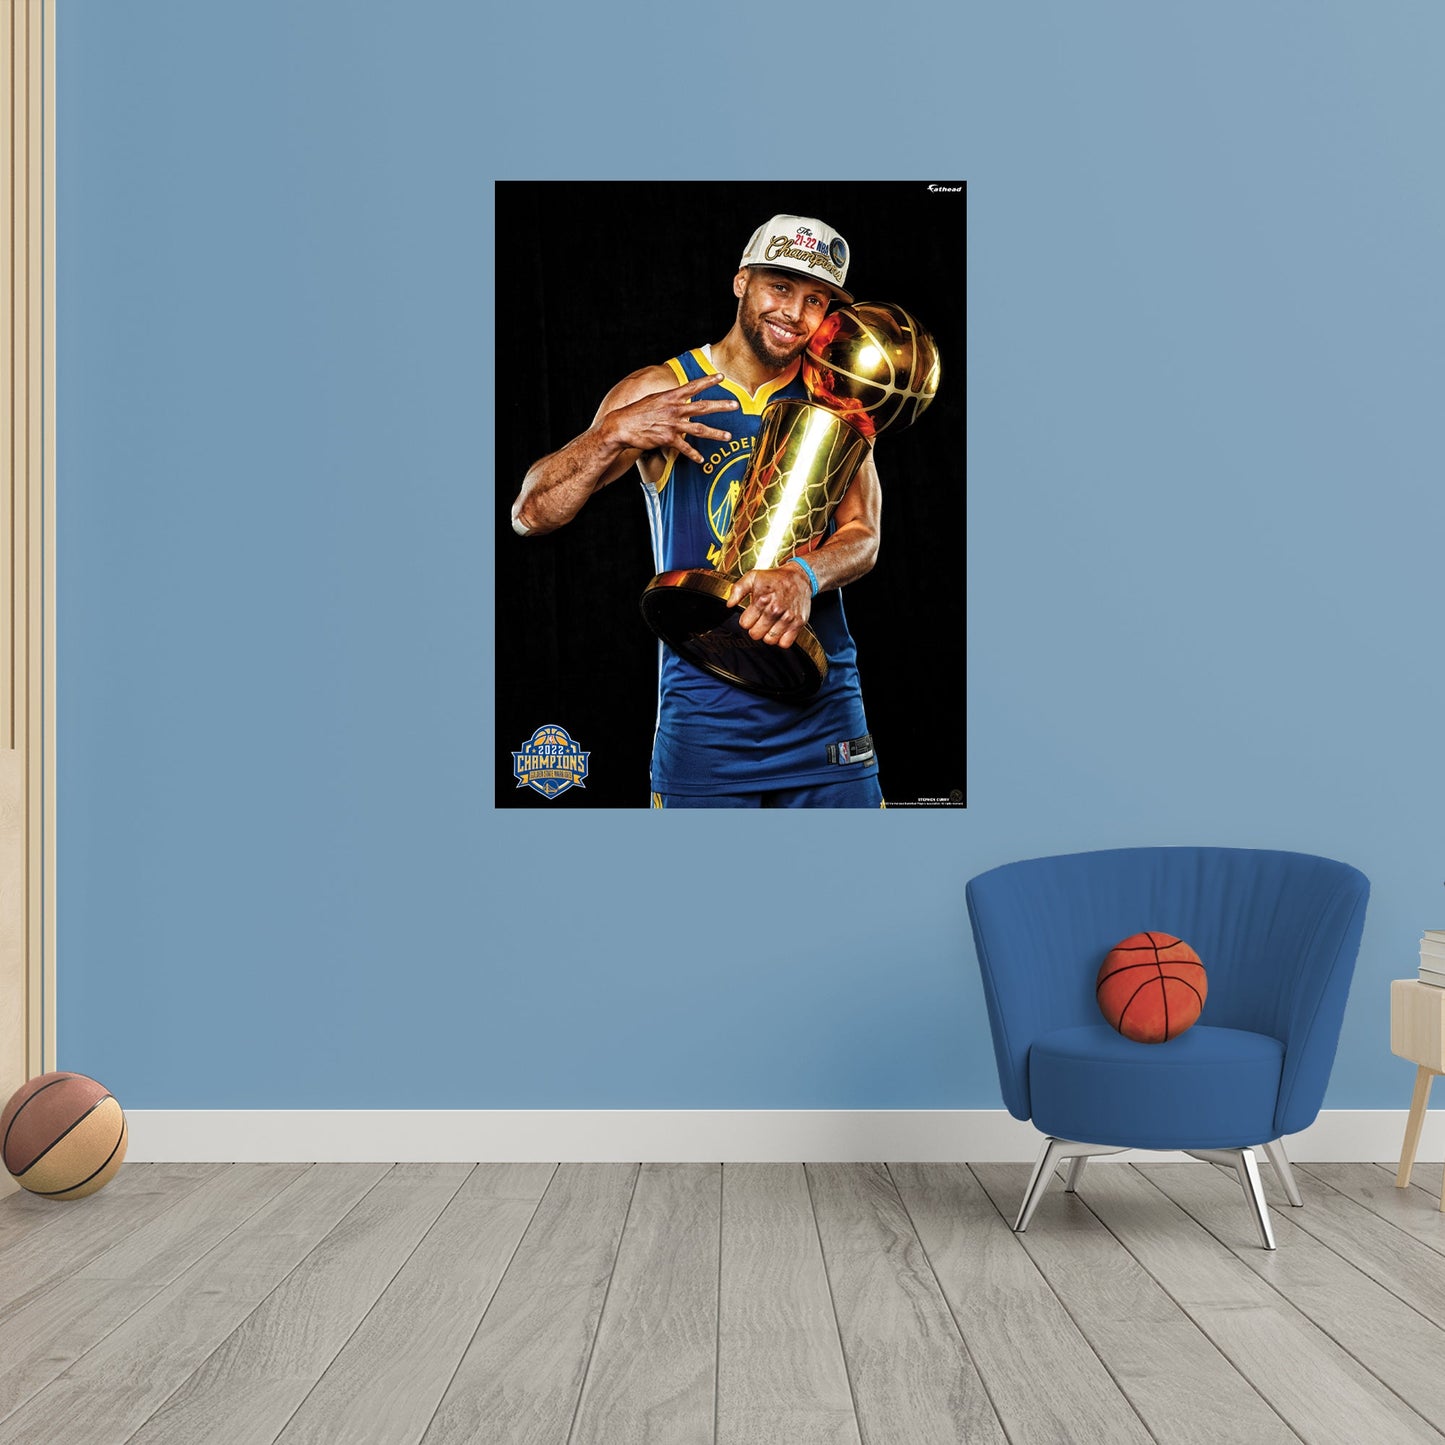 Golden State Warriors: Stephen Curry 2022 Champion Trophy Poster - Officially Licensed NBA Removable Adhesive Decal